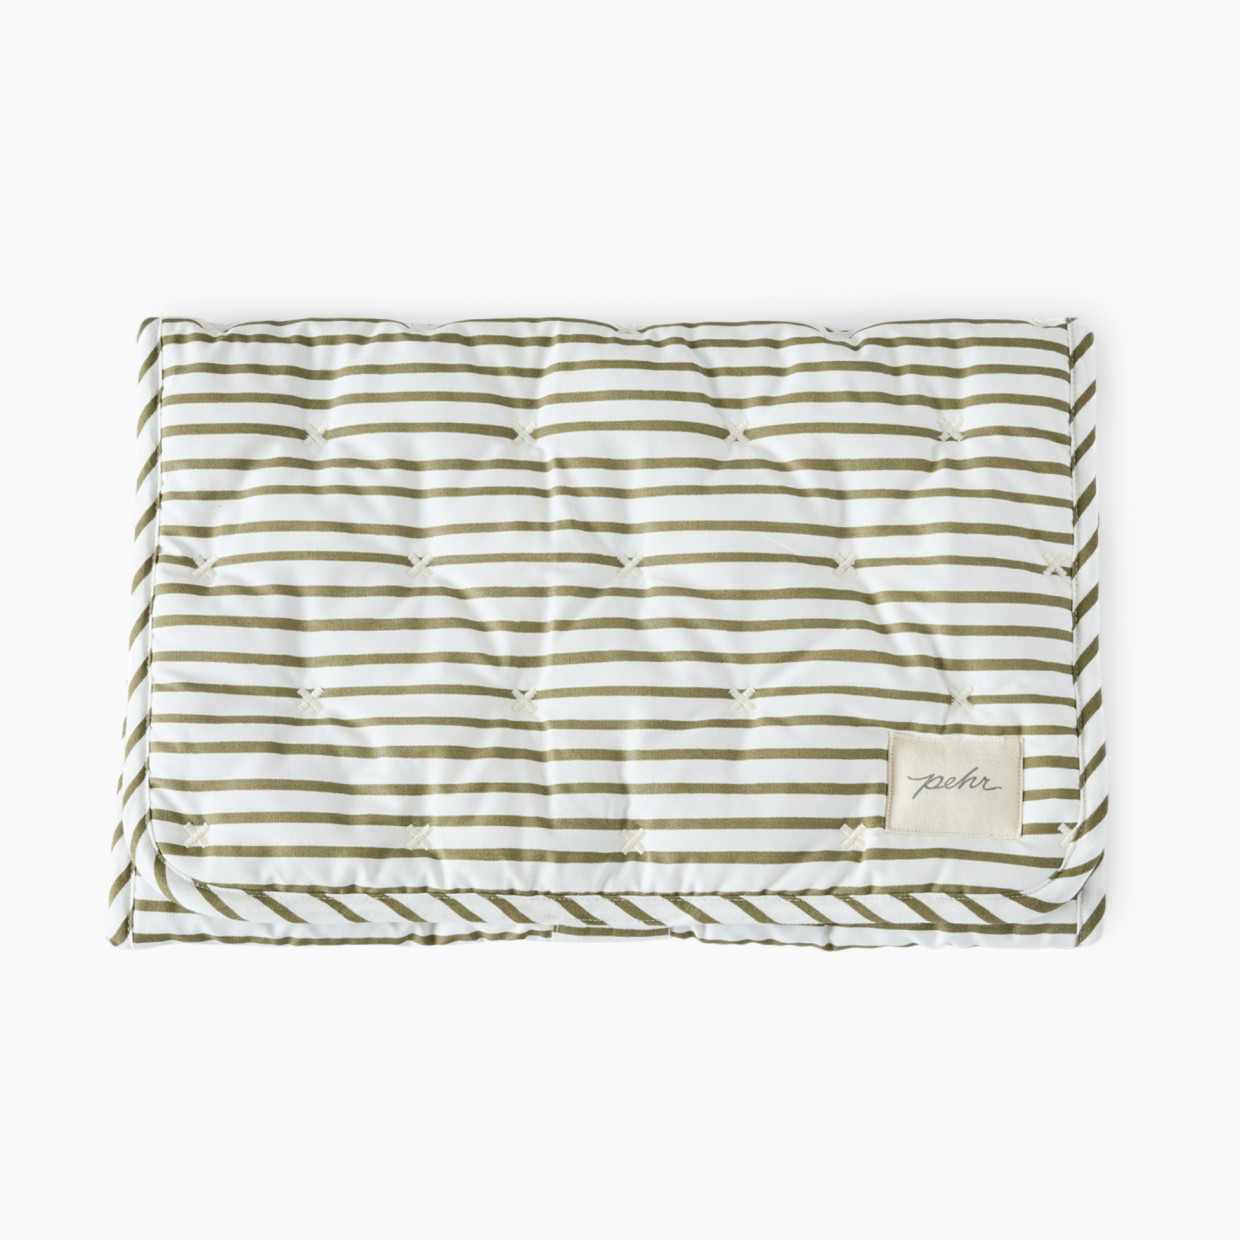 Pehr On the Go Portable Changing Pad - Olive.